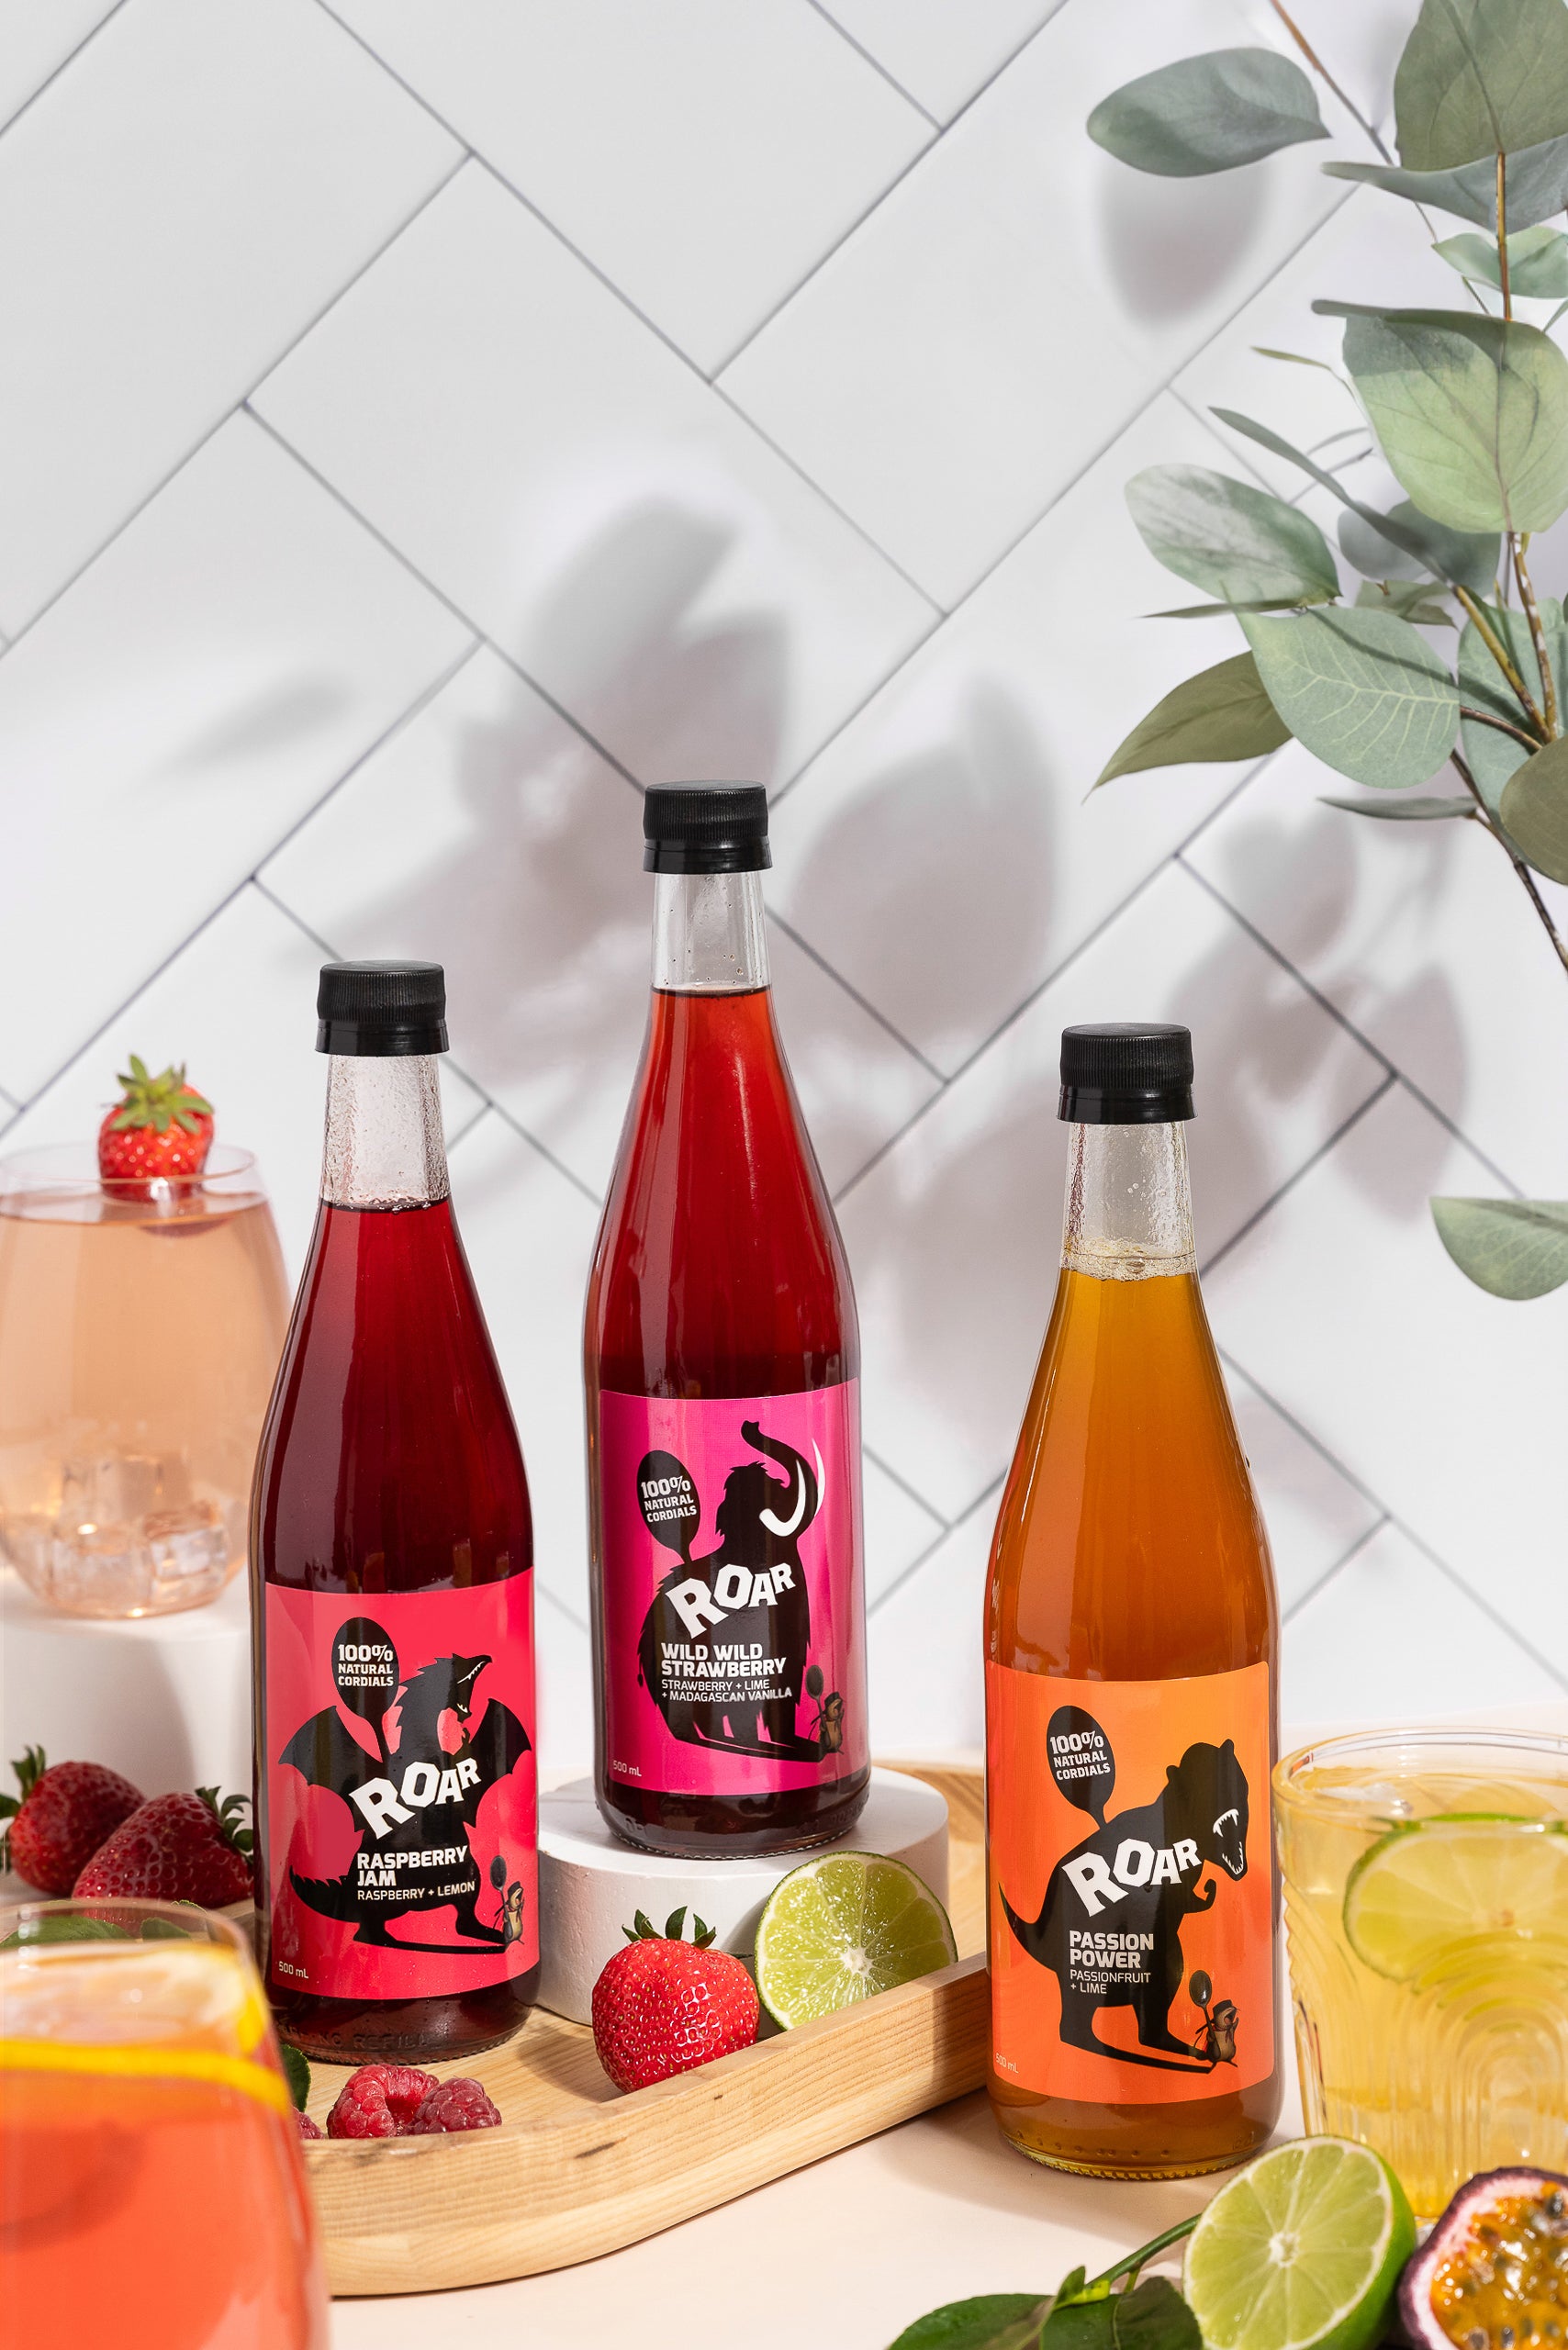 Urban Cordial: Naturally delicious, low-sugar cordials made from